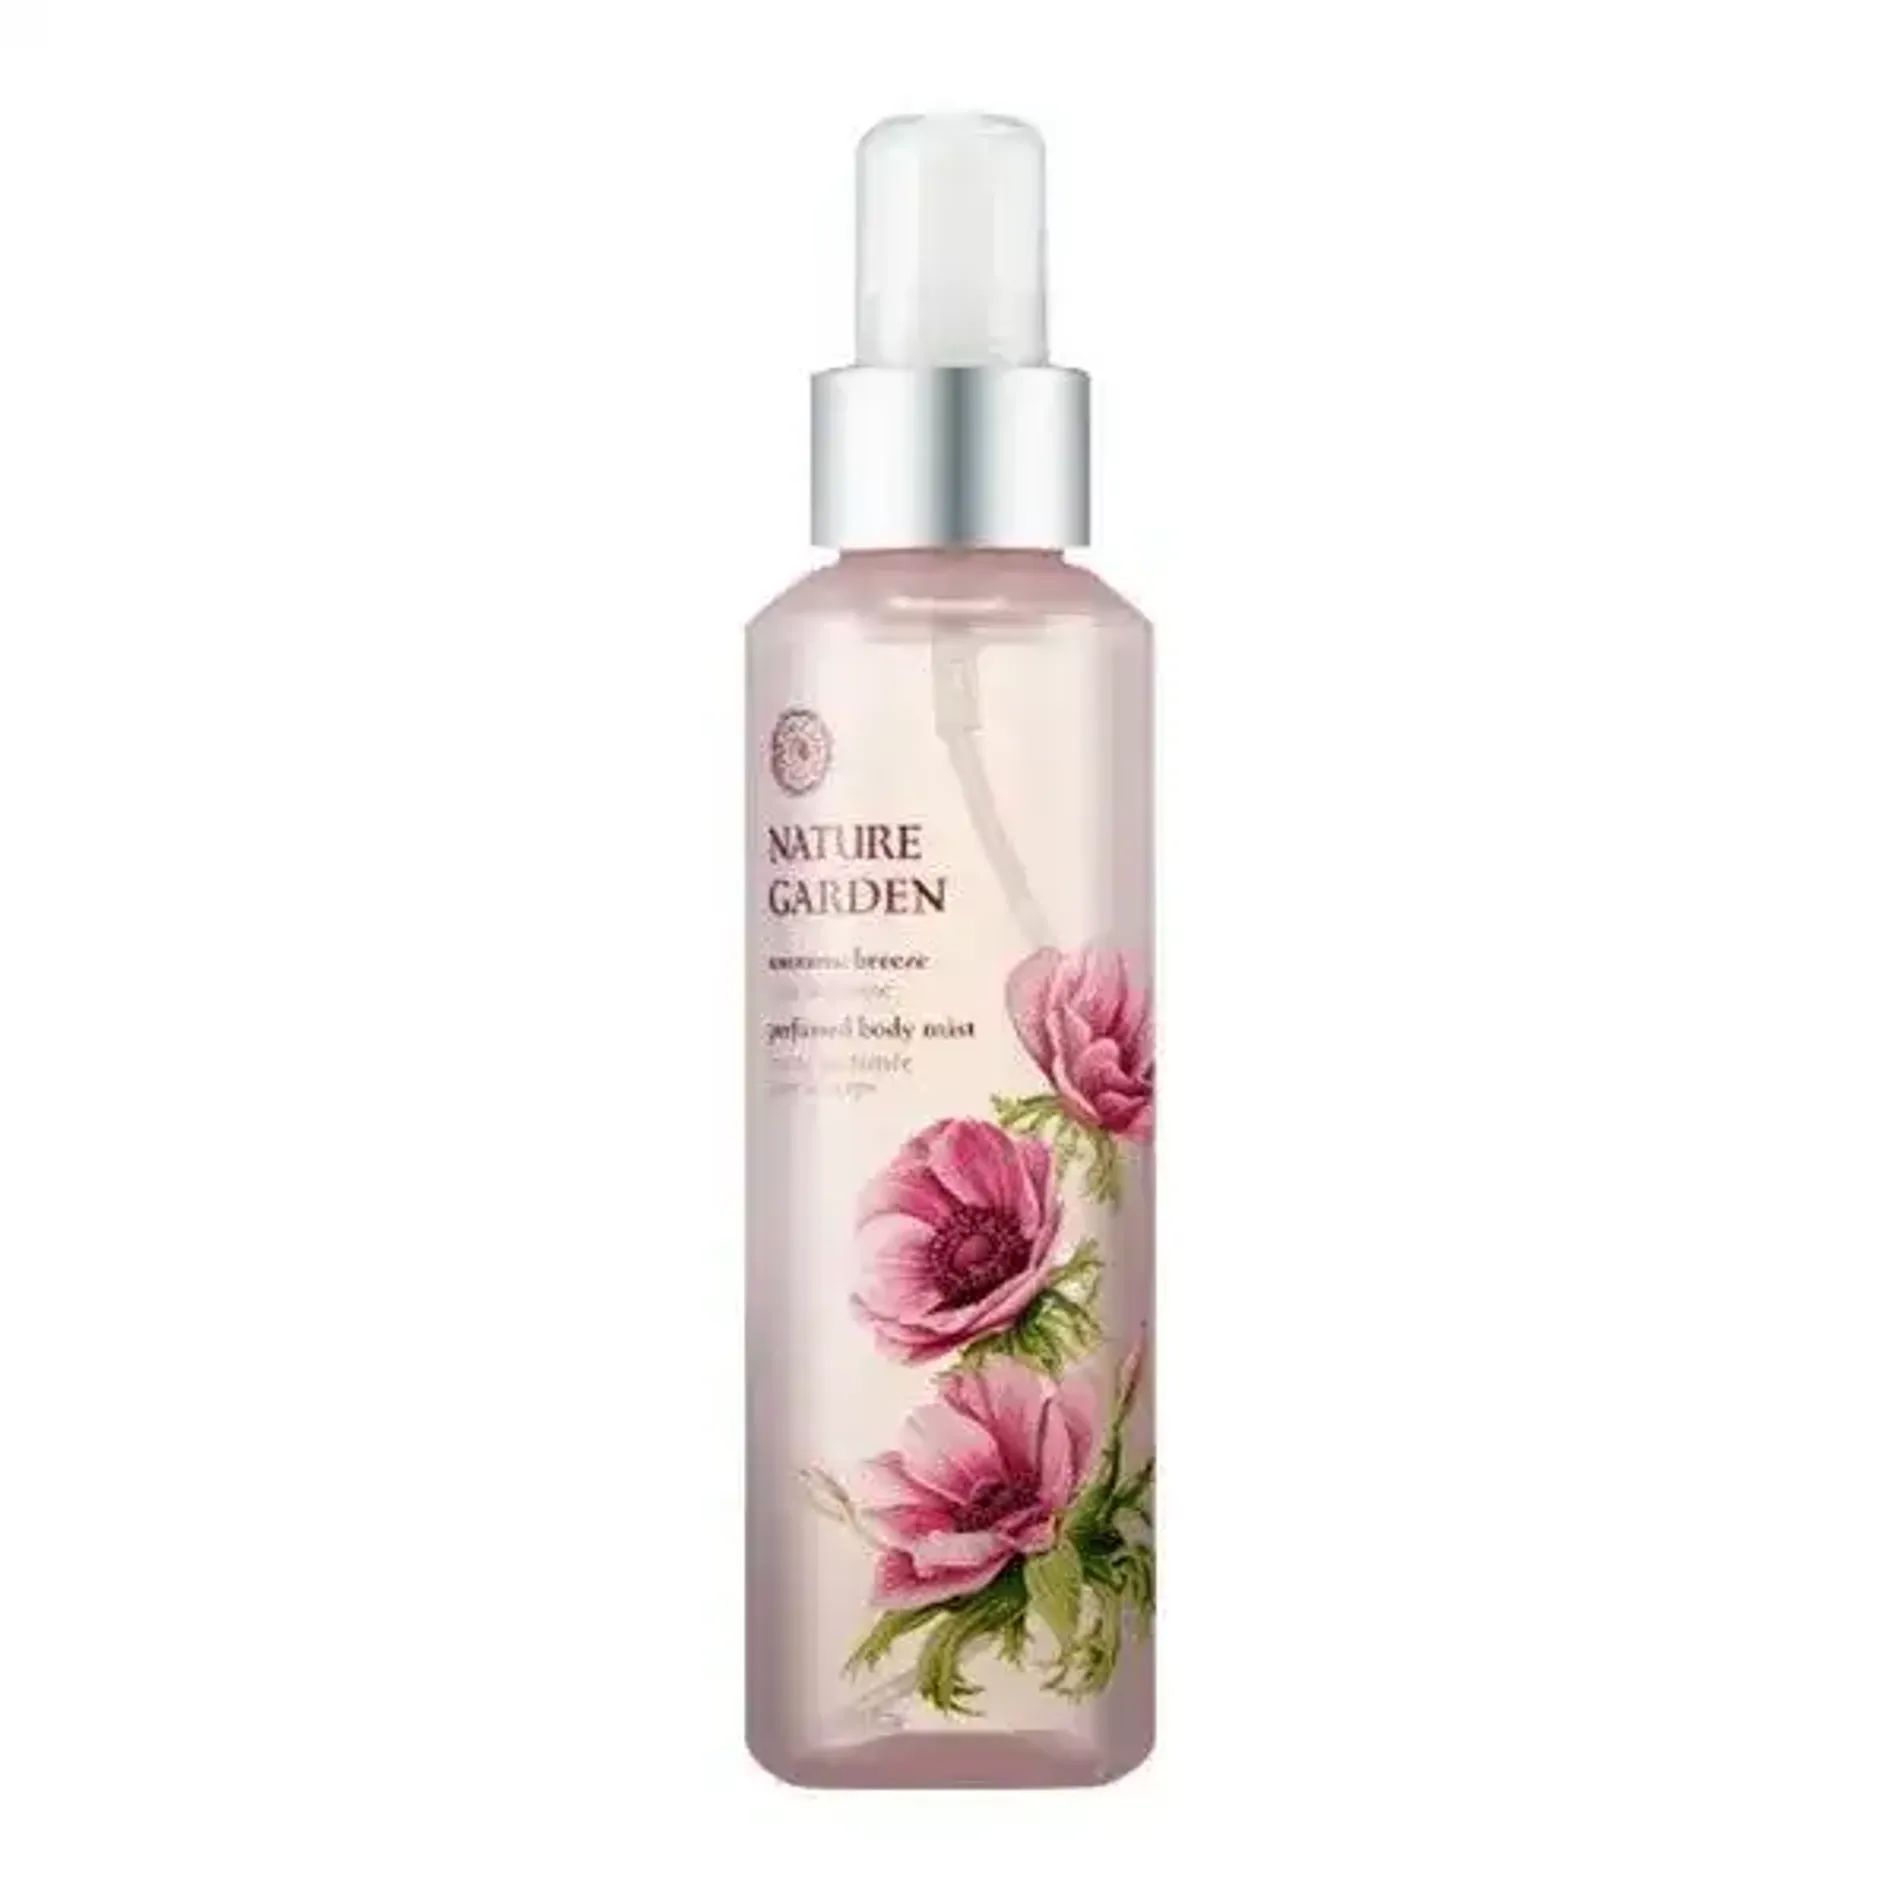 xit-duong-the-thefaceshop-nature-garden-anemone-breeze-perfumed-body-mist-155ml-1